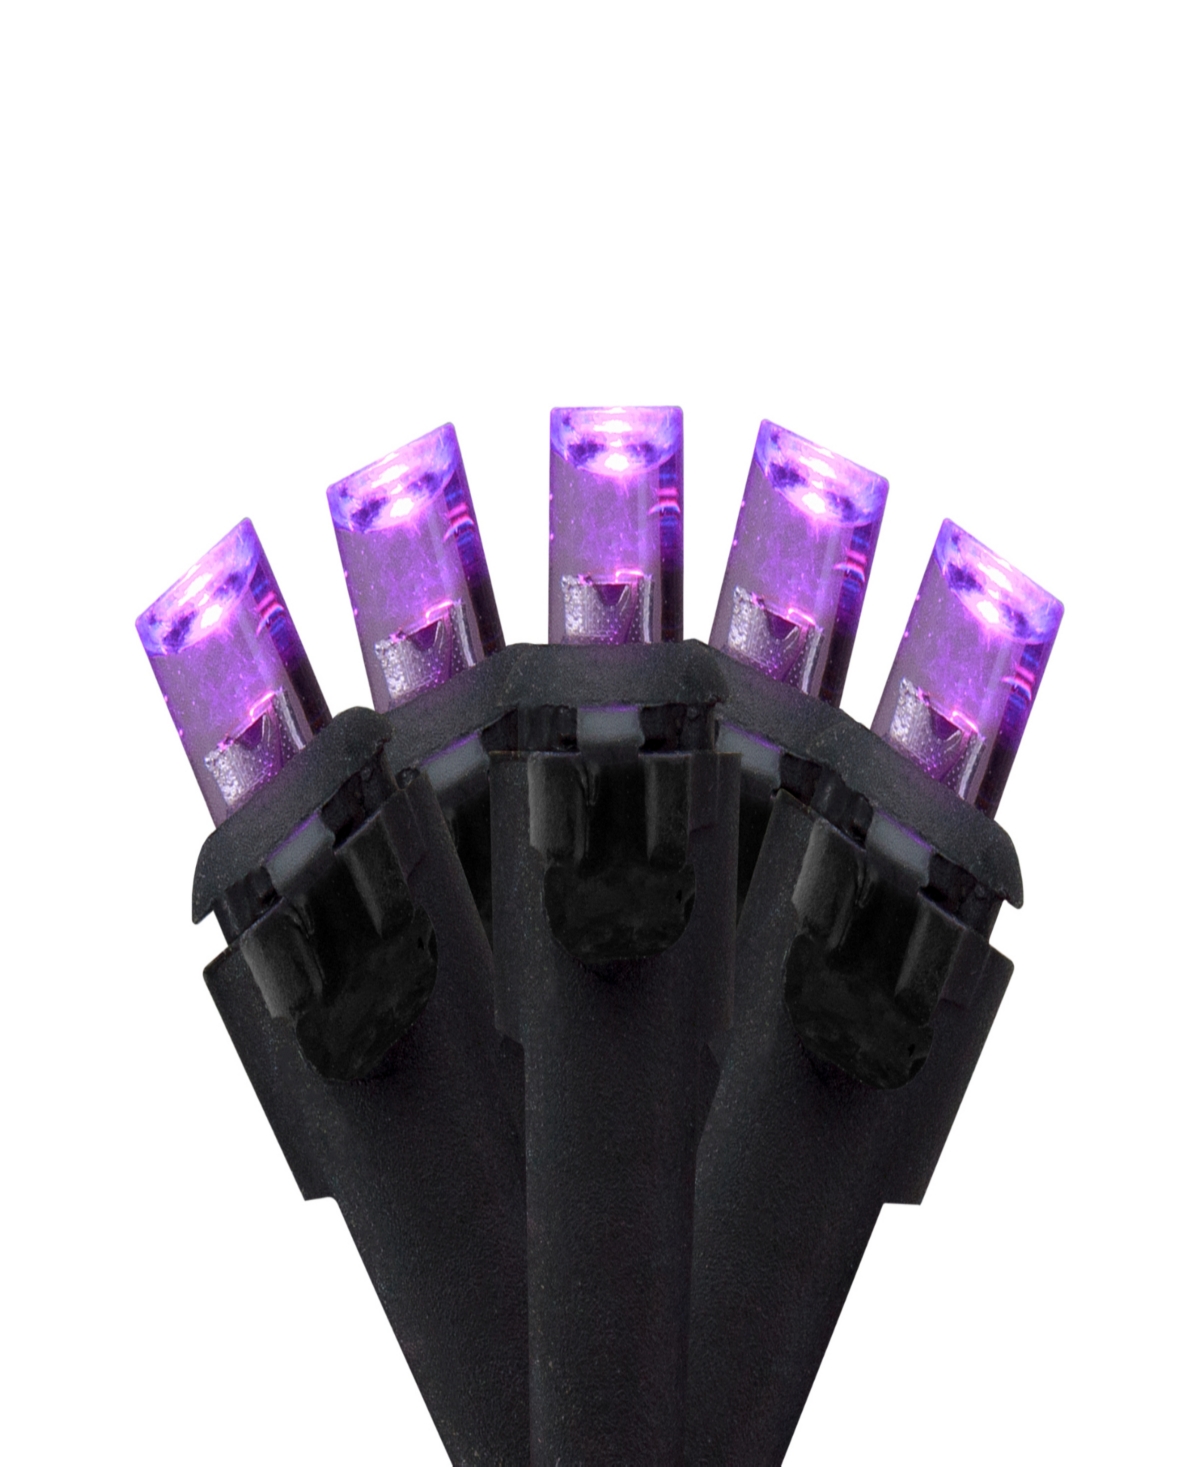 Northlight 50 Count Wide Angle Led Christmas Lights, 16' Black Wire In Purple